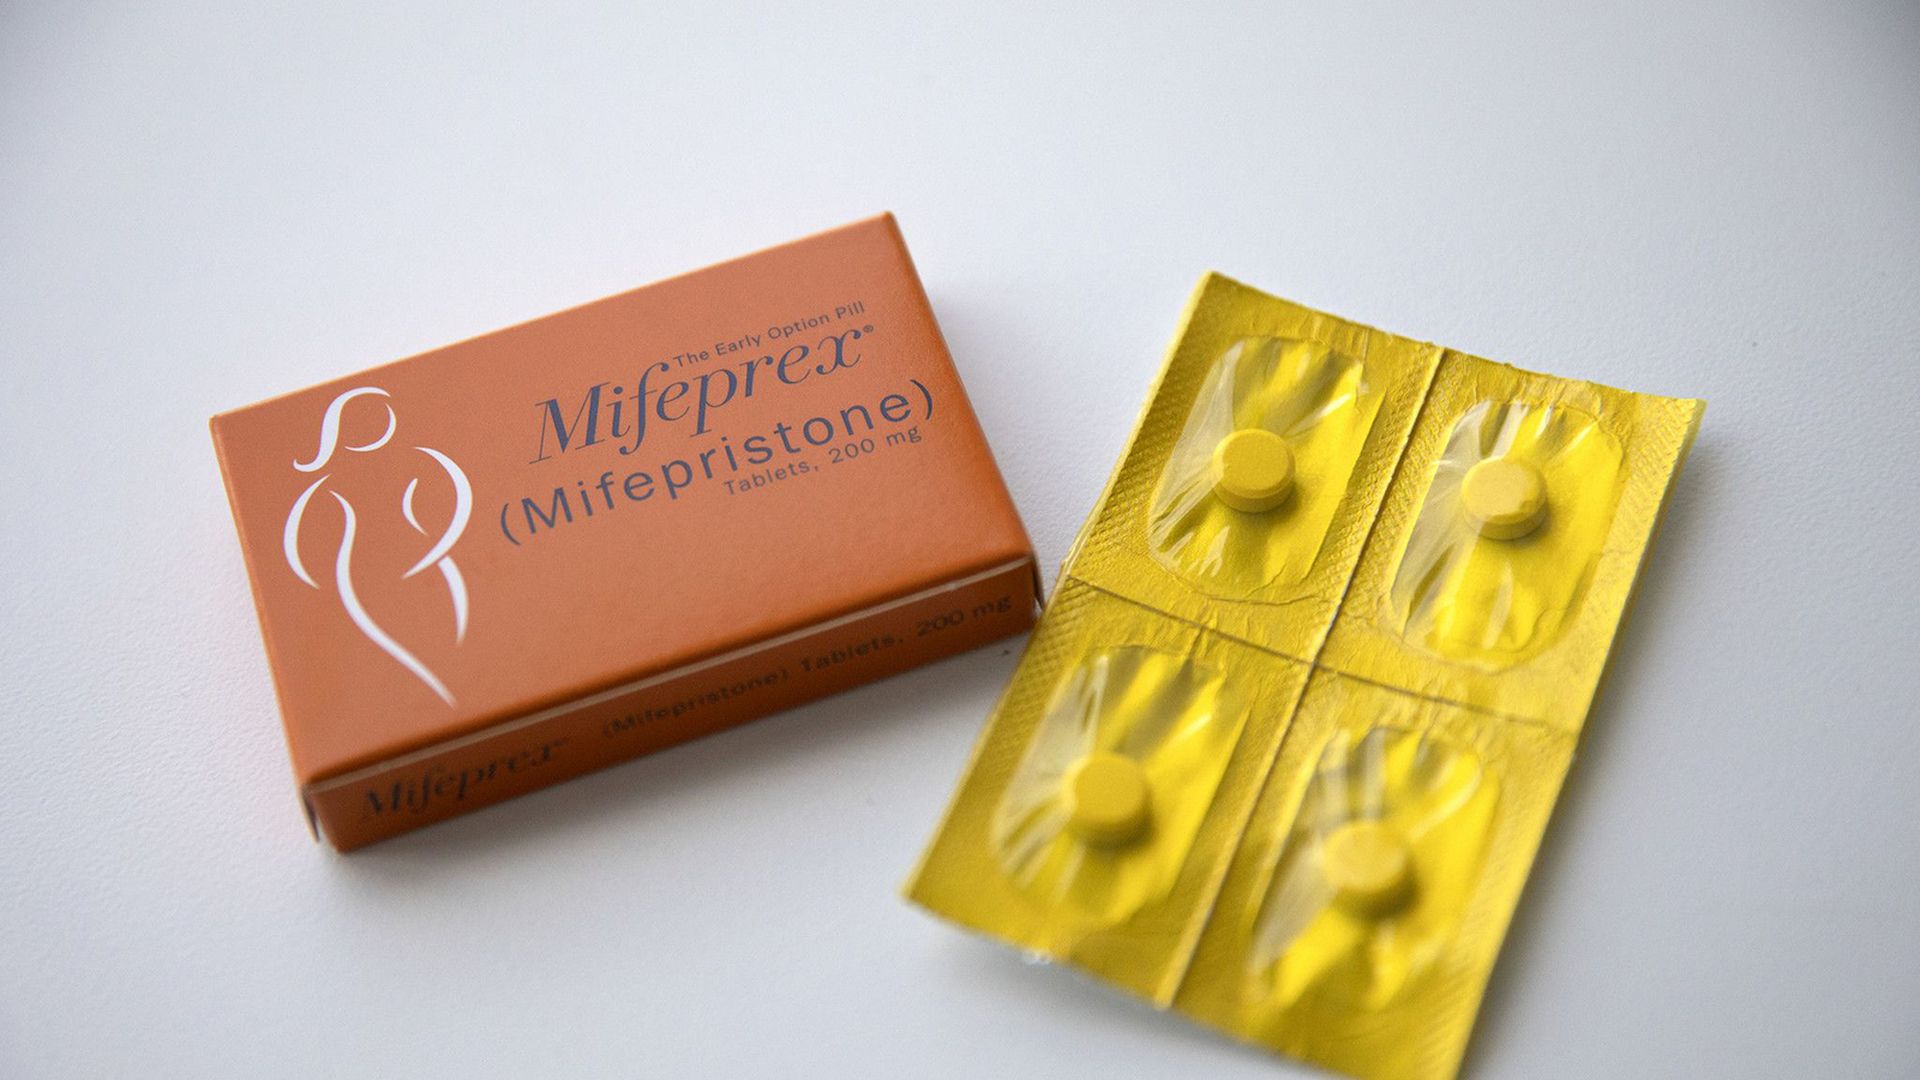 Picture of a box of mifepristone and a case of misoprostol, both of which are considered abortion pills